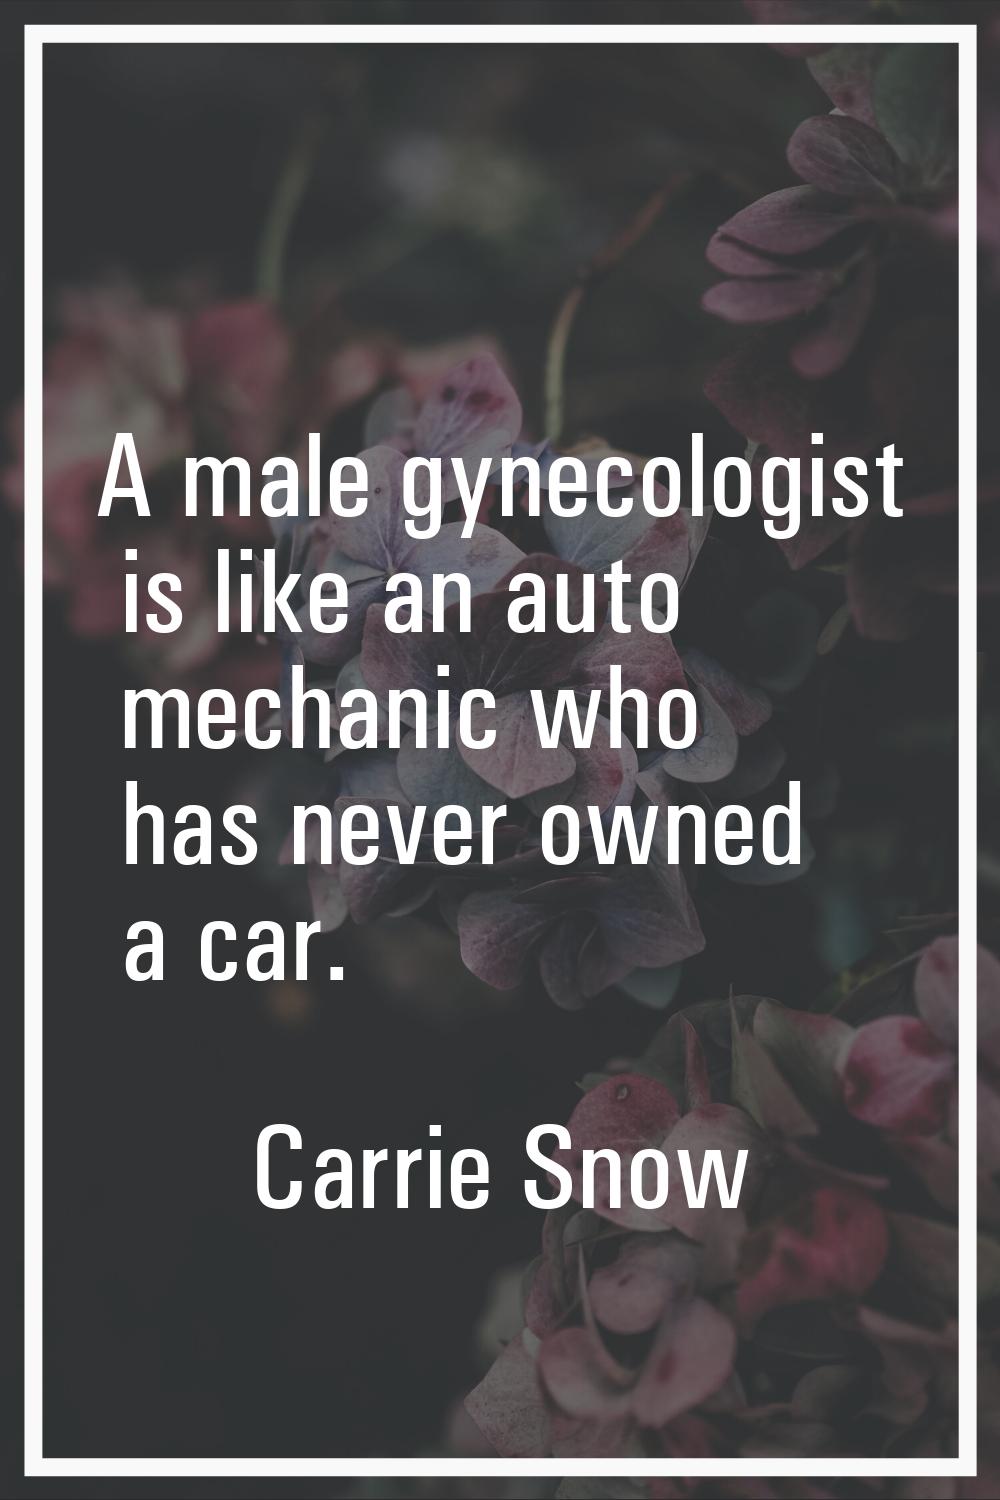 A male gynecologist is like an auto mechanic who has never owned a car.